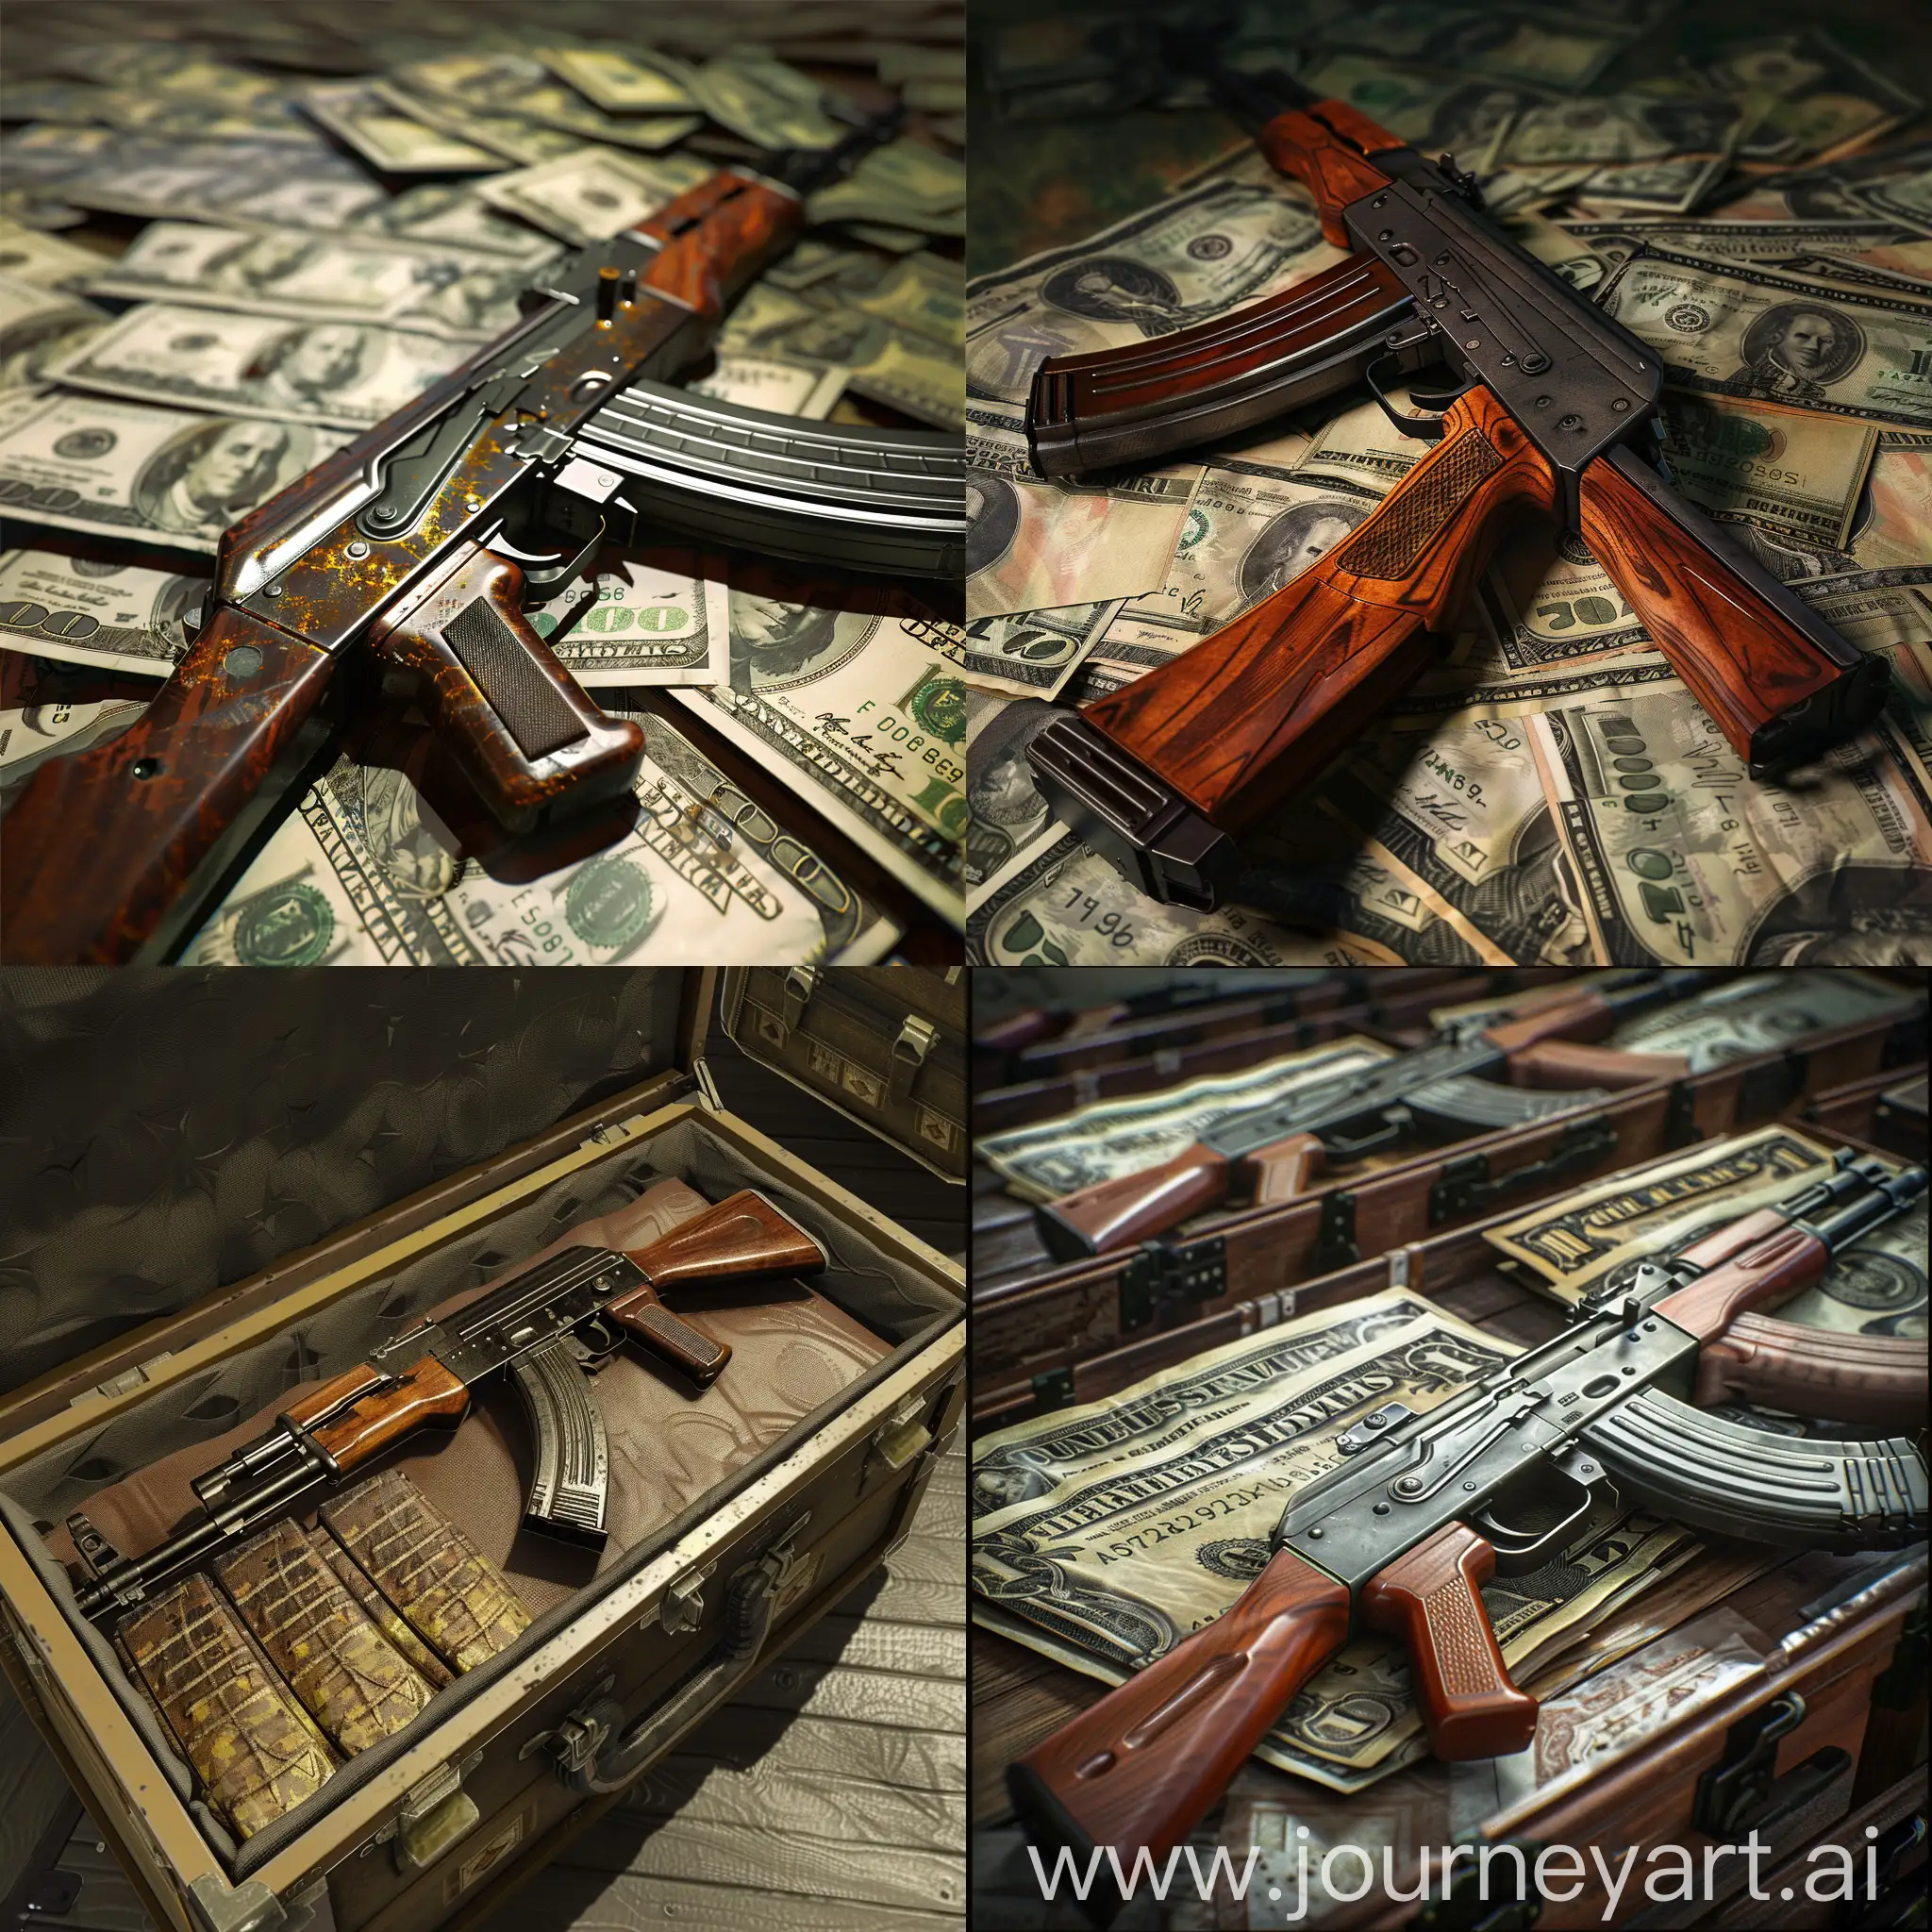 HighValue-AK47-Arsenal-in-CounterStrike-Global-Offensive